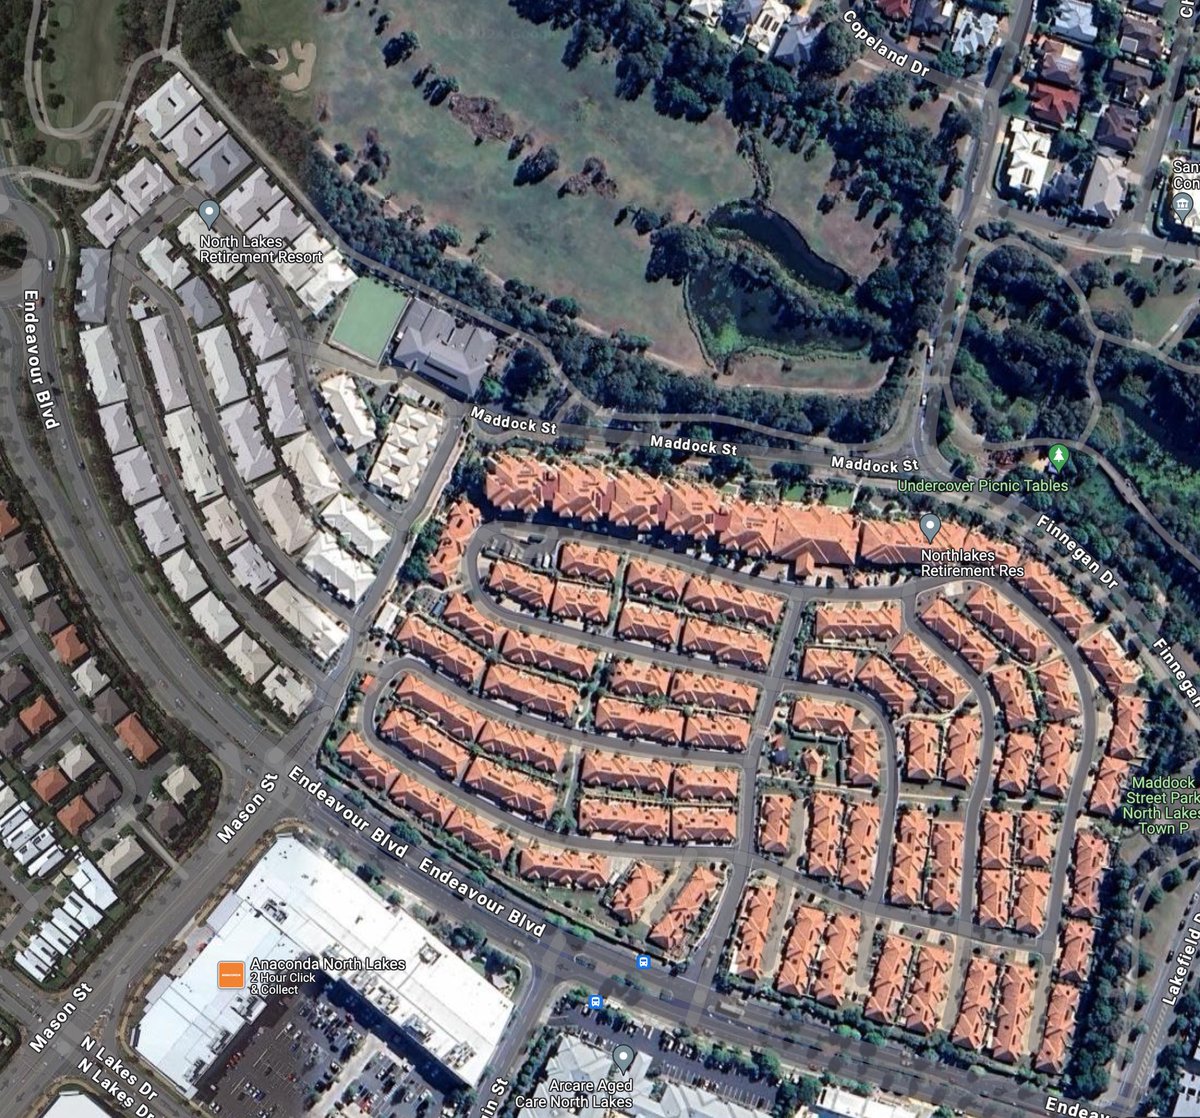 These are not so much #missingmiddle as missing anything good.
So many such dismal arrangements of bunched & hunched dwellings across  suburban Australia - these in Nth Brisbane. 
Tree haters; Enclaves of dismal environments - these have gall to claim as aged housing ‘resorts’